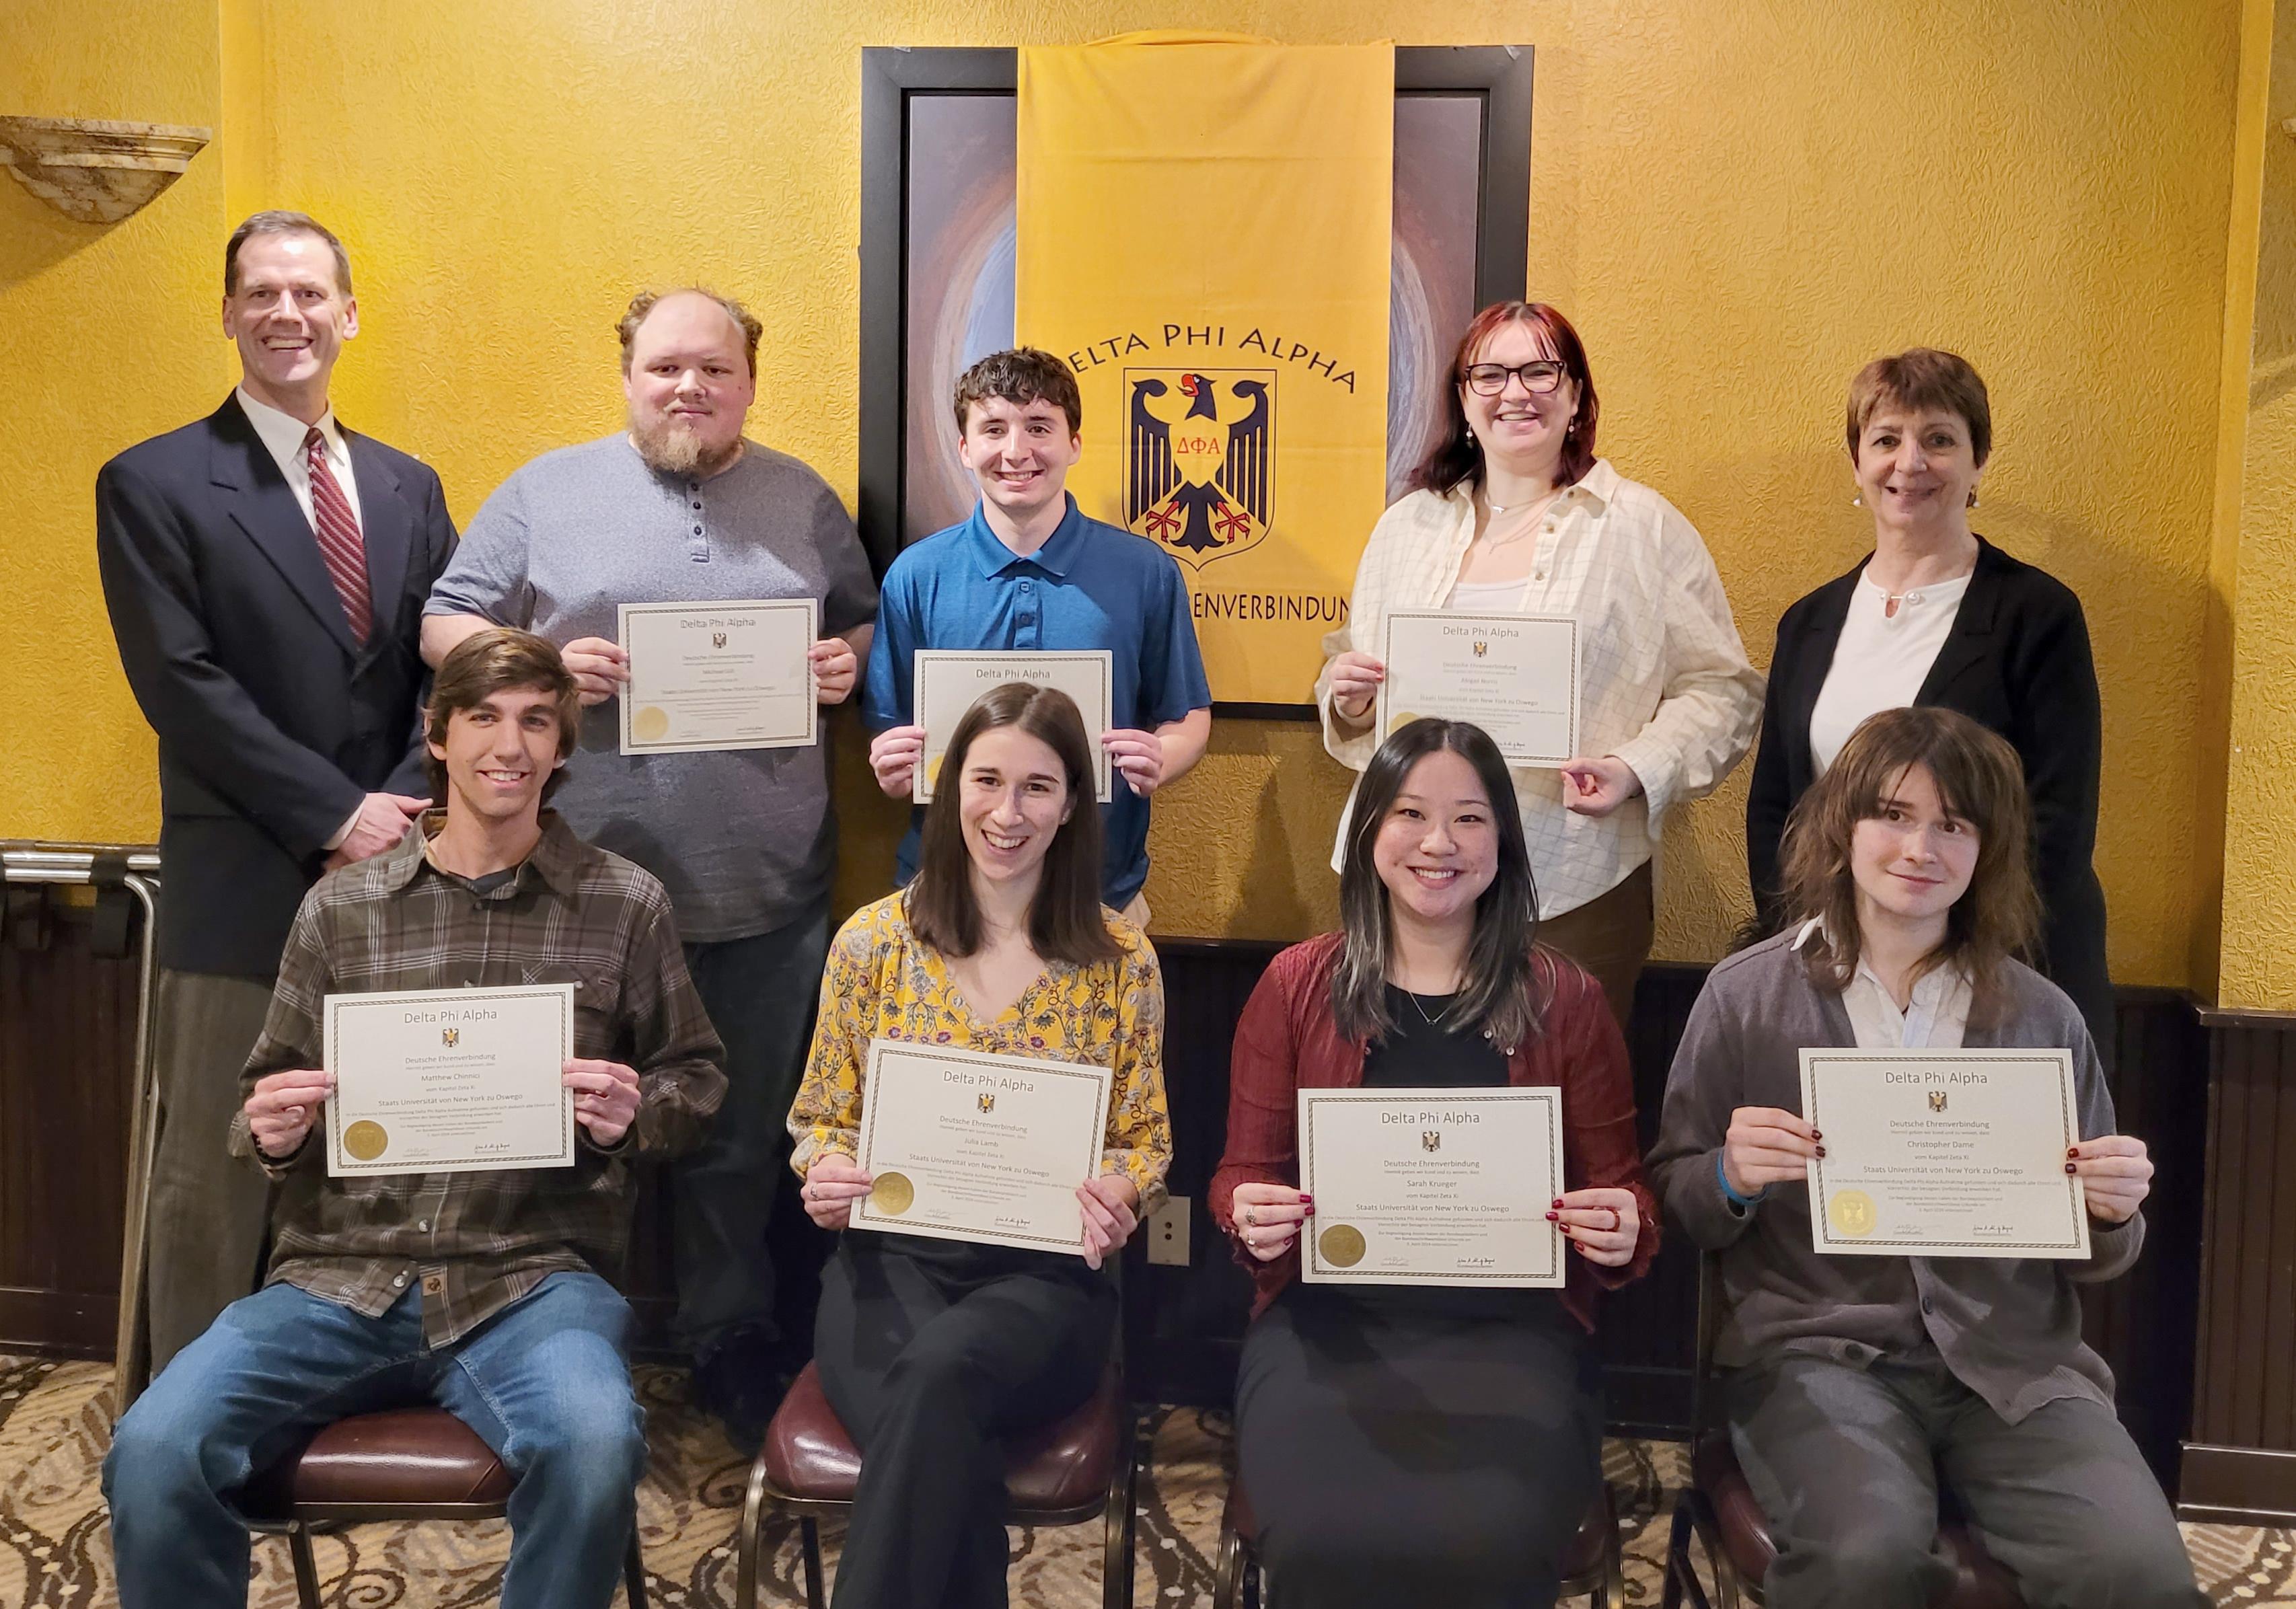 Six Oswego students and a staff member were recently inducted into the SUNY Oswego chapter of Delta Phi Alpha, the National German Honor Society.